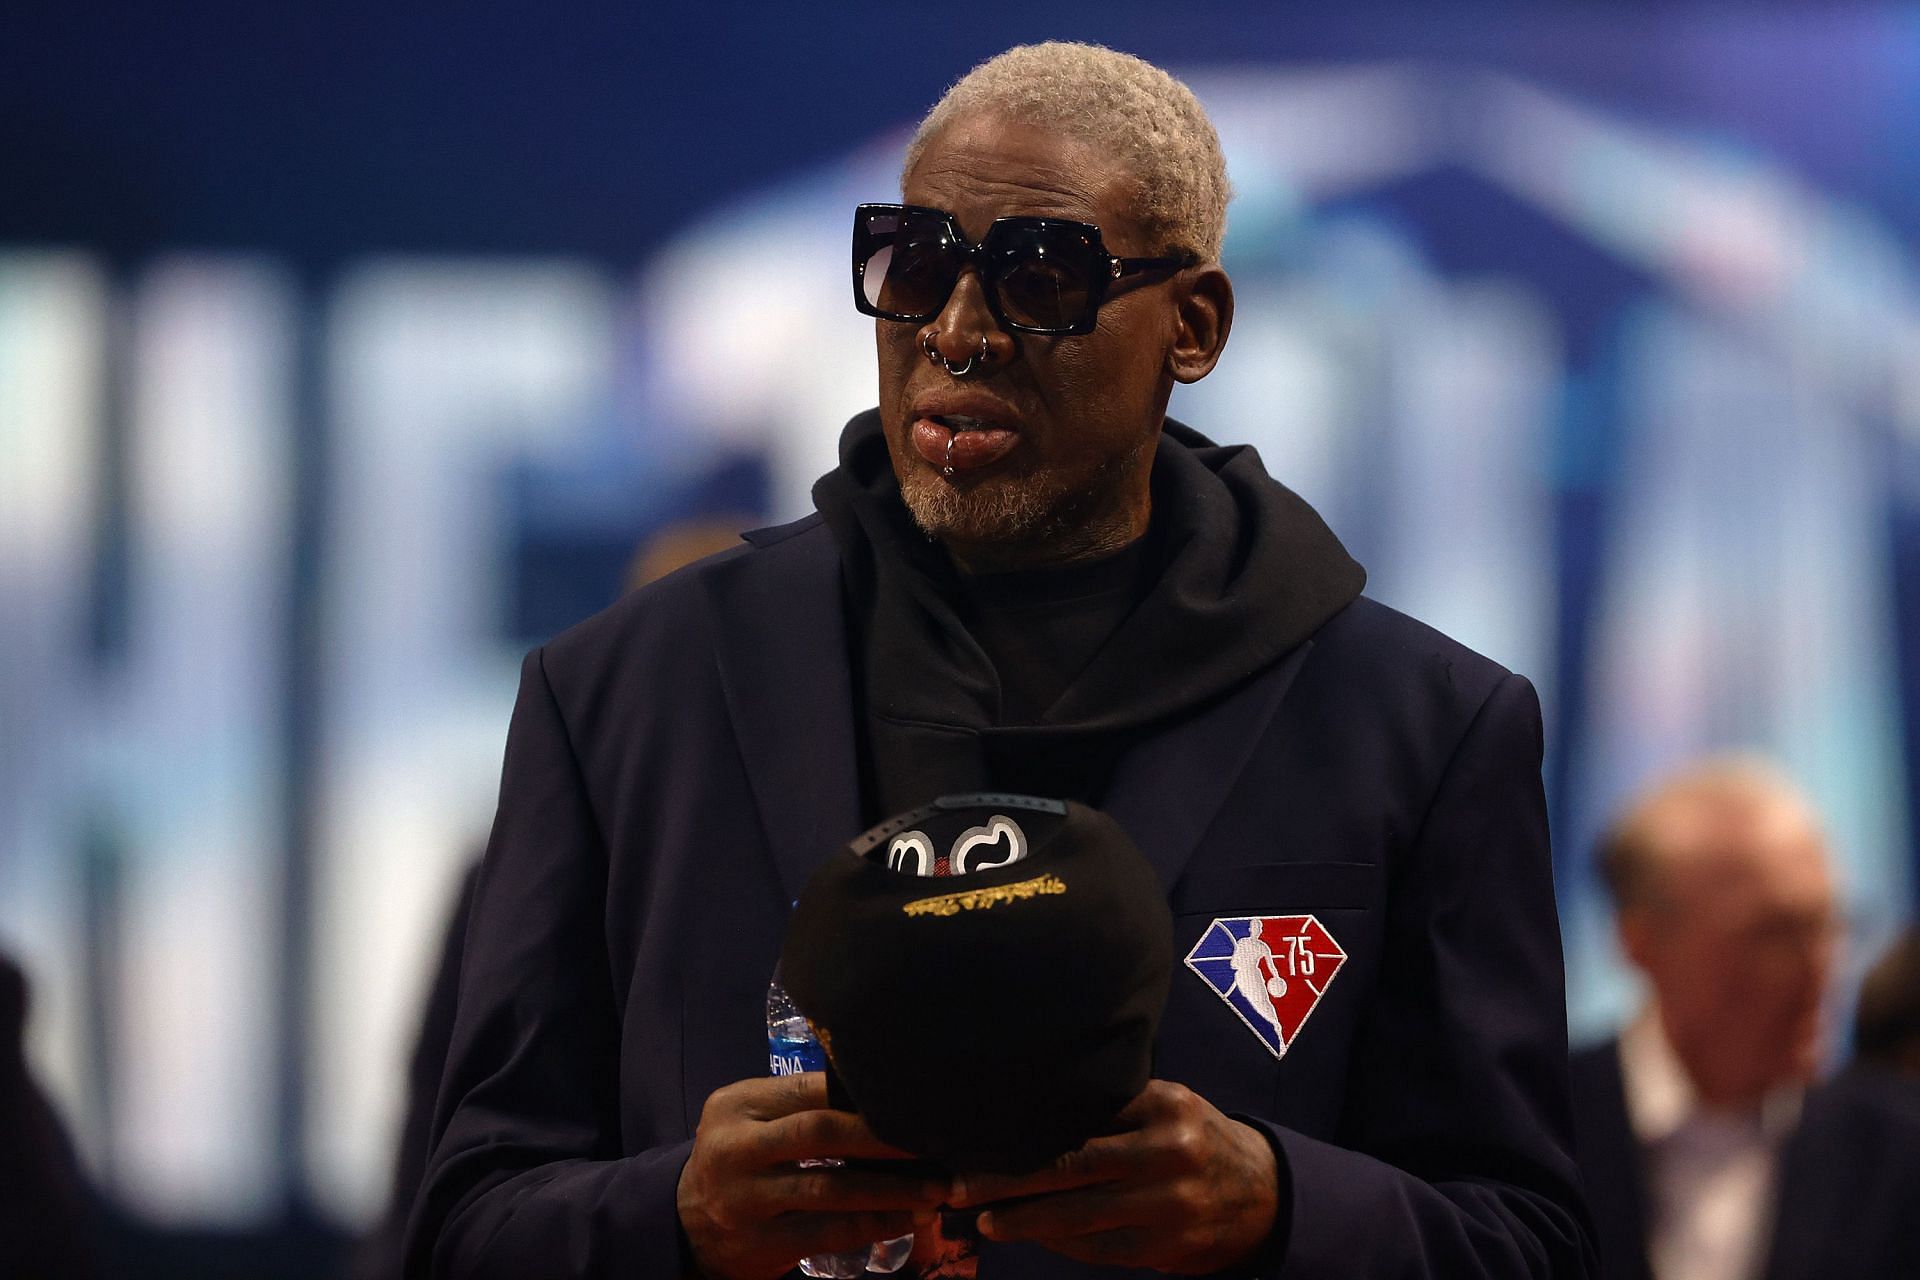 Dennis Rodman won three NBA titles with the Chicago Bulls between 1996 and 1998